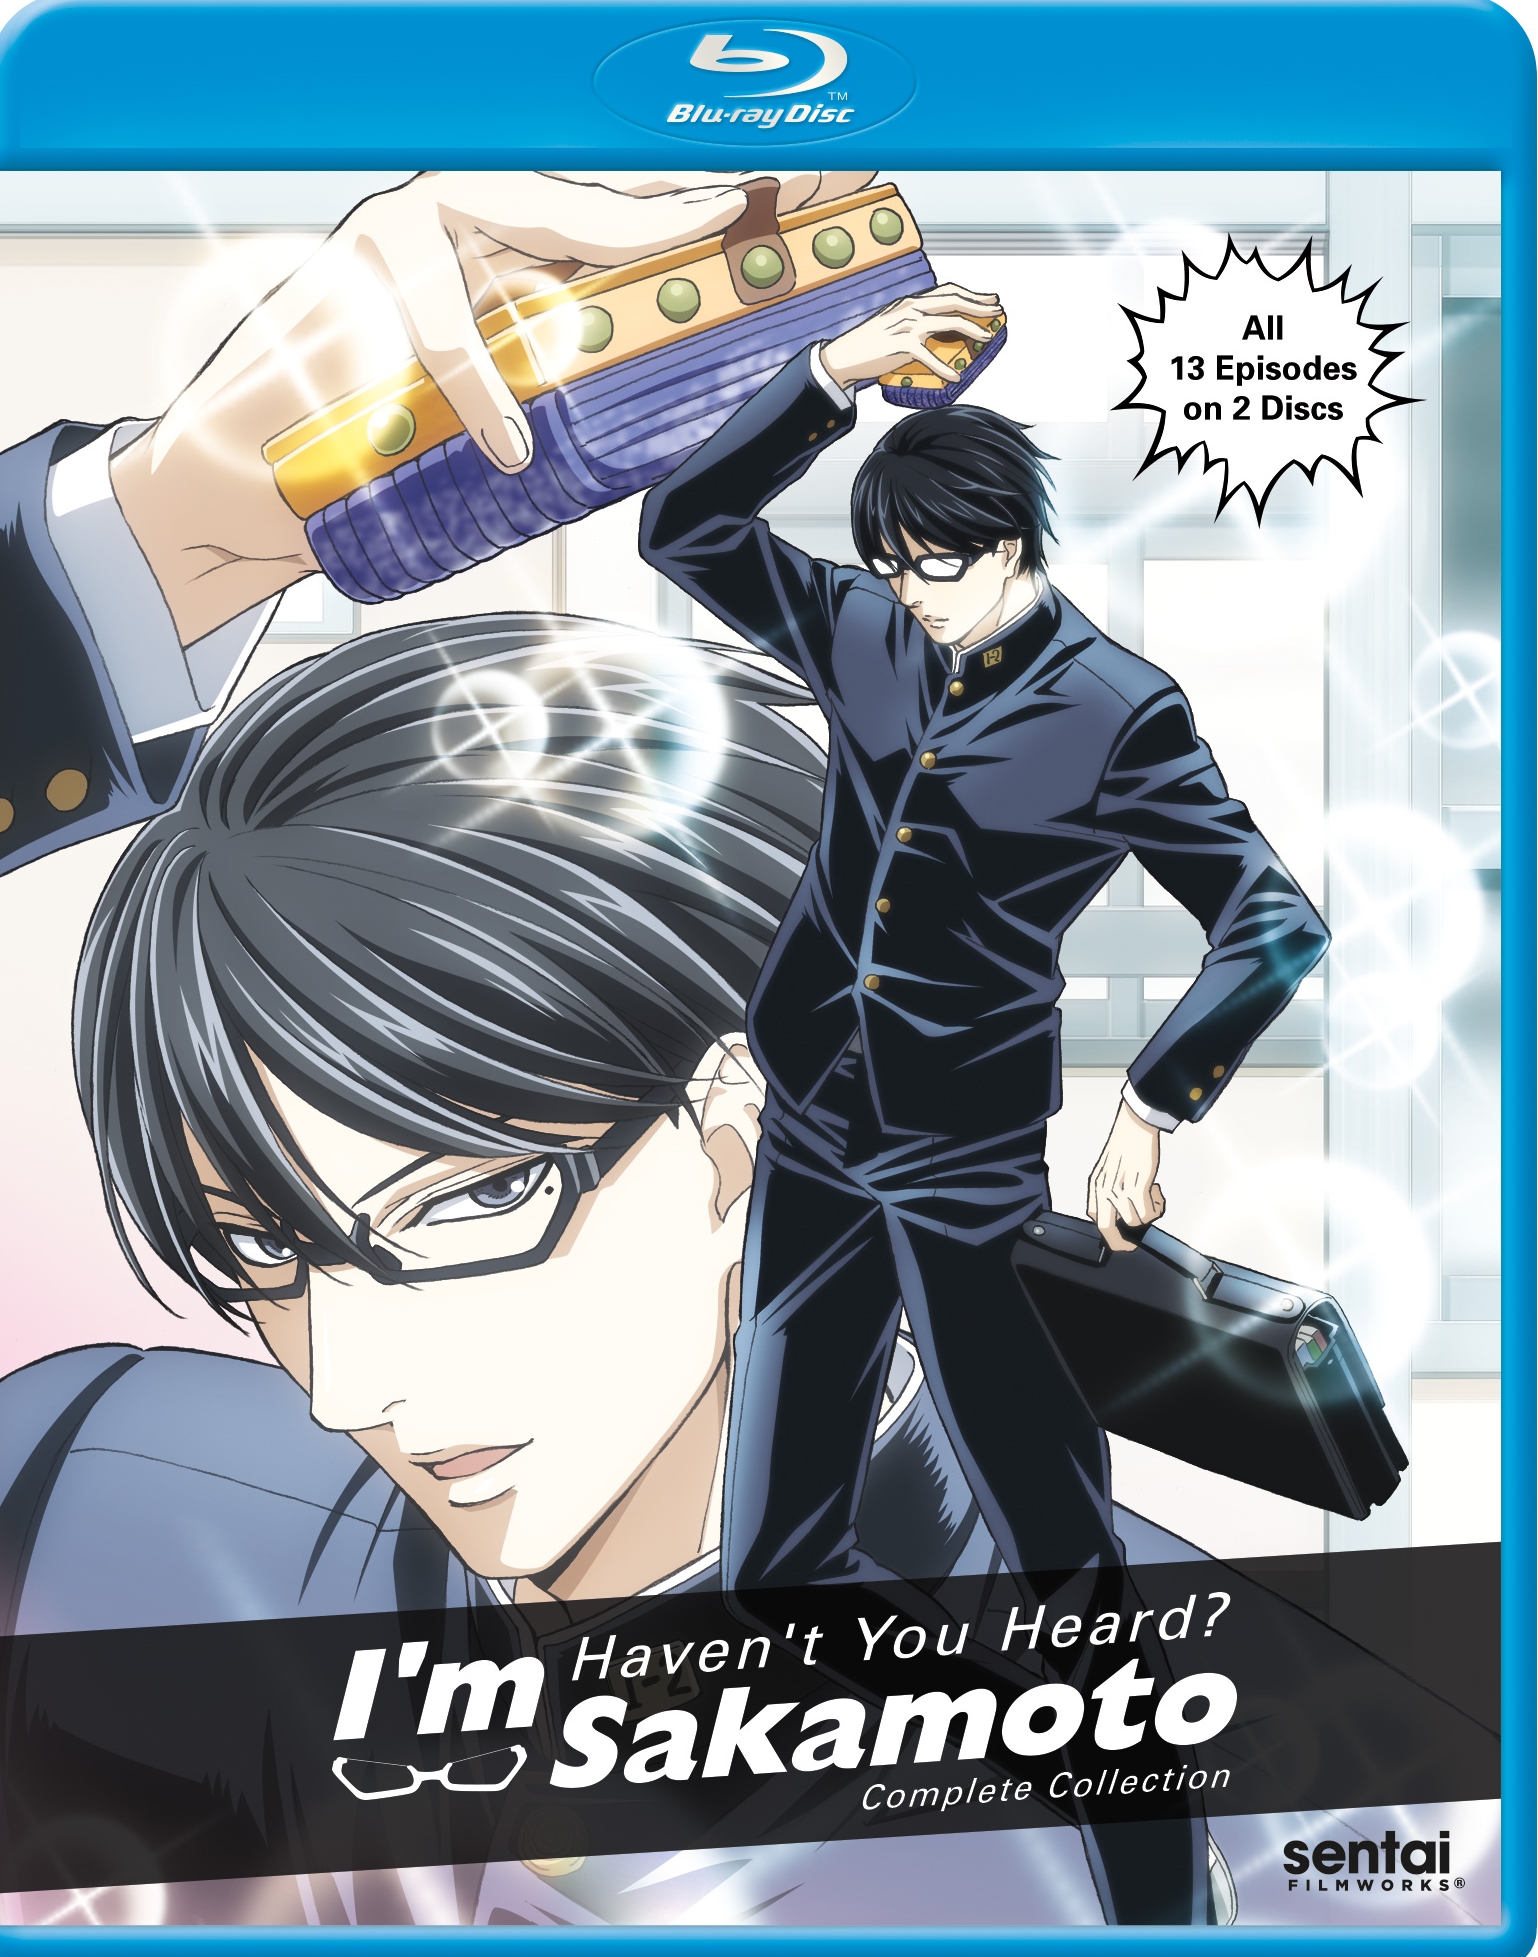 Haven't You Heard? I'm Sakamoto: Complete Collection (Blu-ray, 2